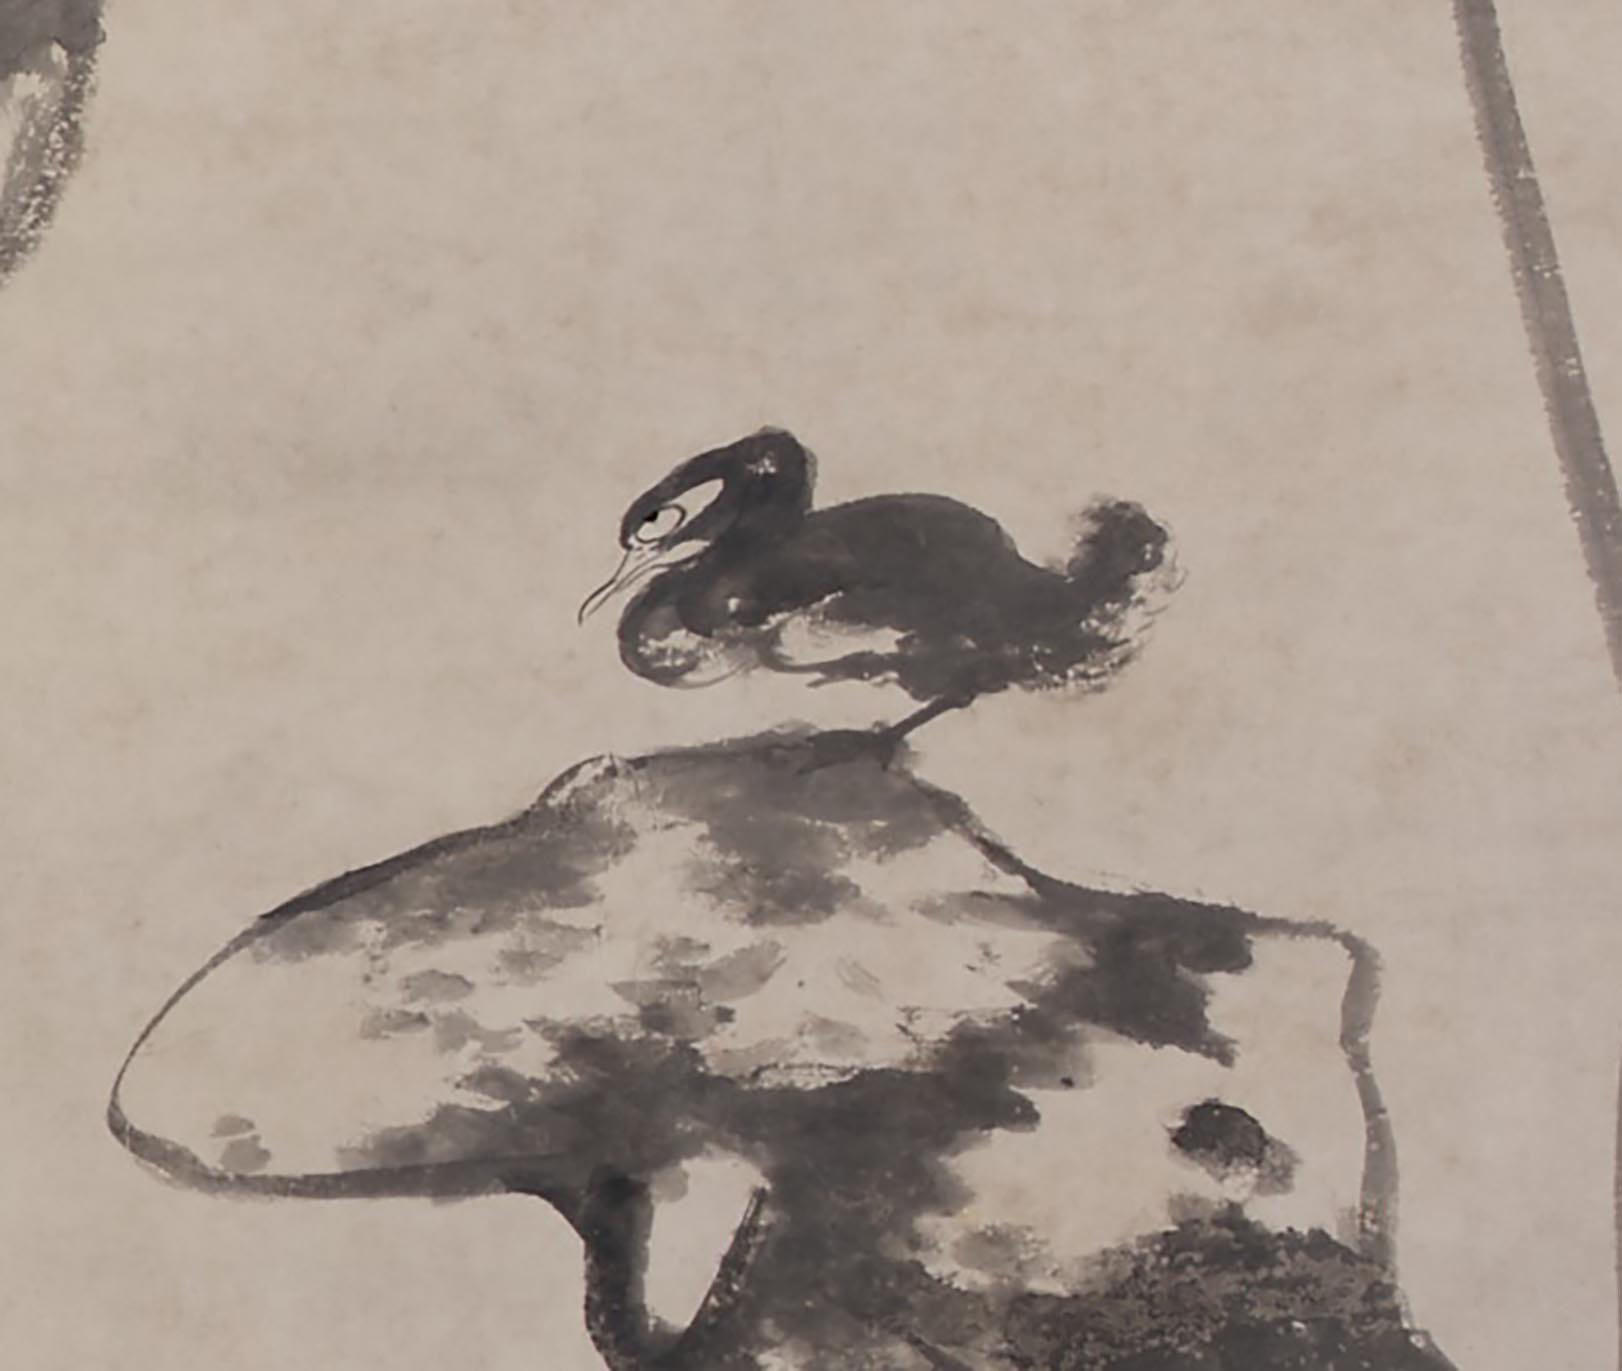 Thumbnail Bada Shanren 八大山人 (朱耷), Lotus and Ducks (colophon by Wu Changshuo 吳昌碩), c. 1696 (Qing dynasty), ink on paper (hanging scroll), image 185 x 95.8 cm (Freer Gallery of Art and Arthur M. Sackler Gallery, Smithsonian Institution).